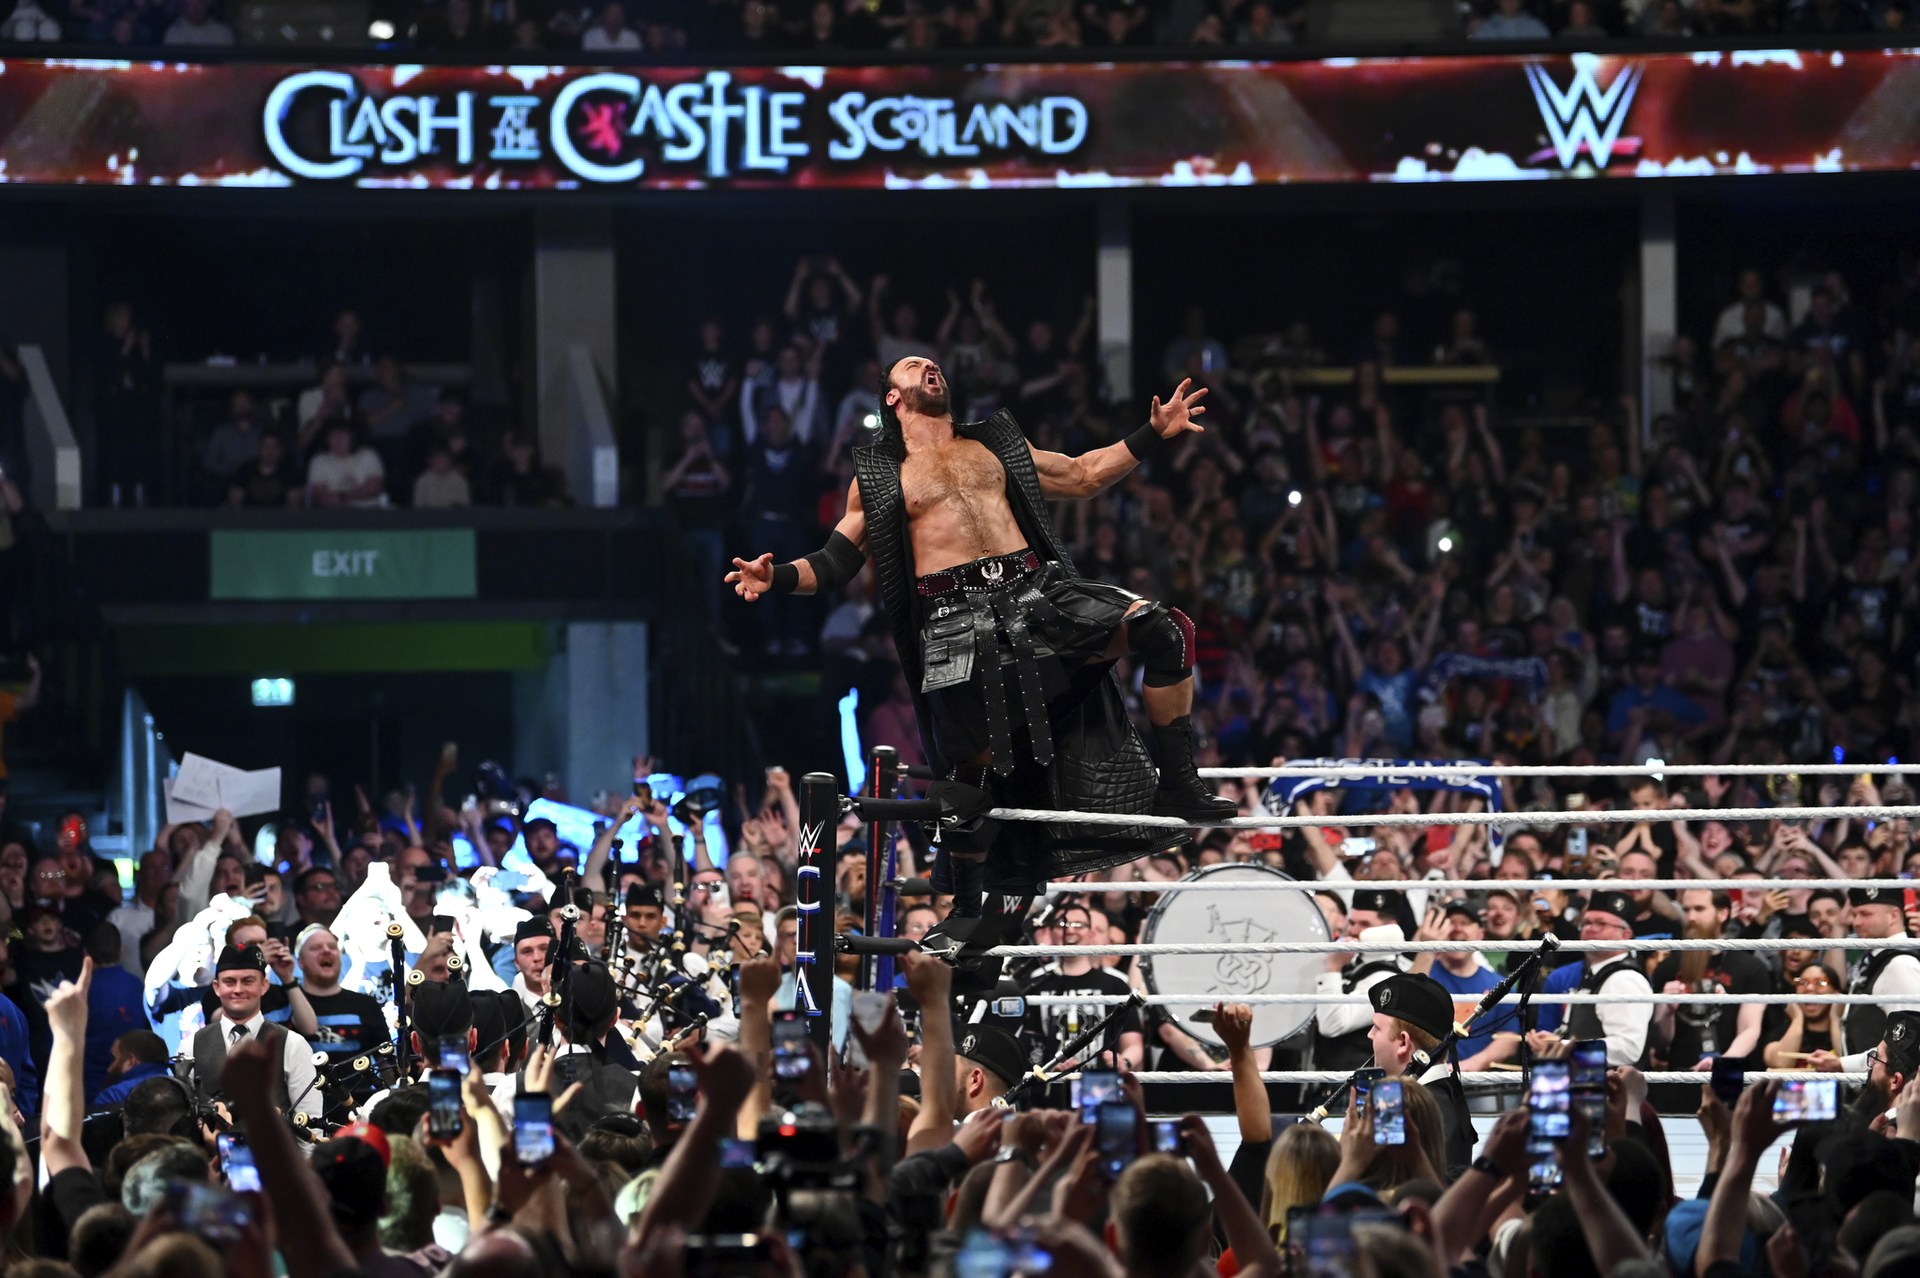 Drew McIntyre was the main event for Clash at the Castle in the Hydro.